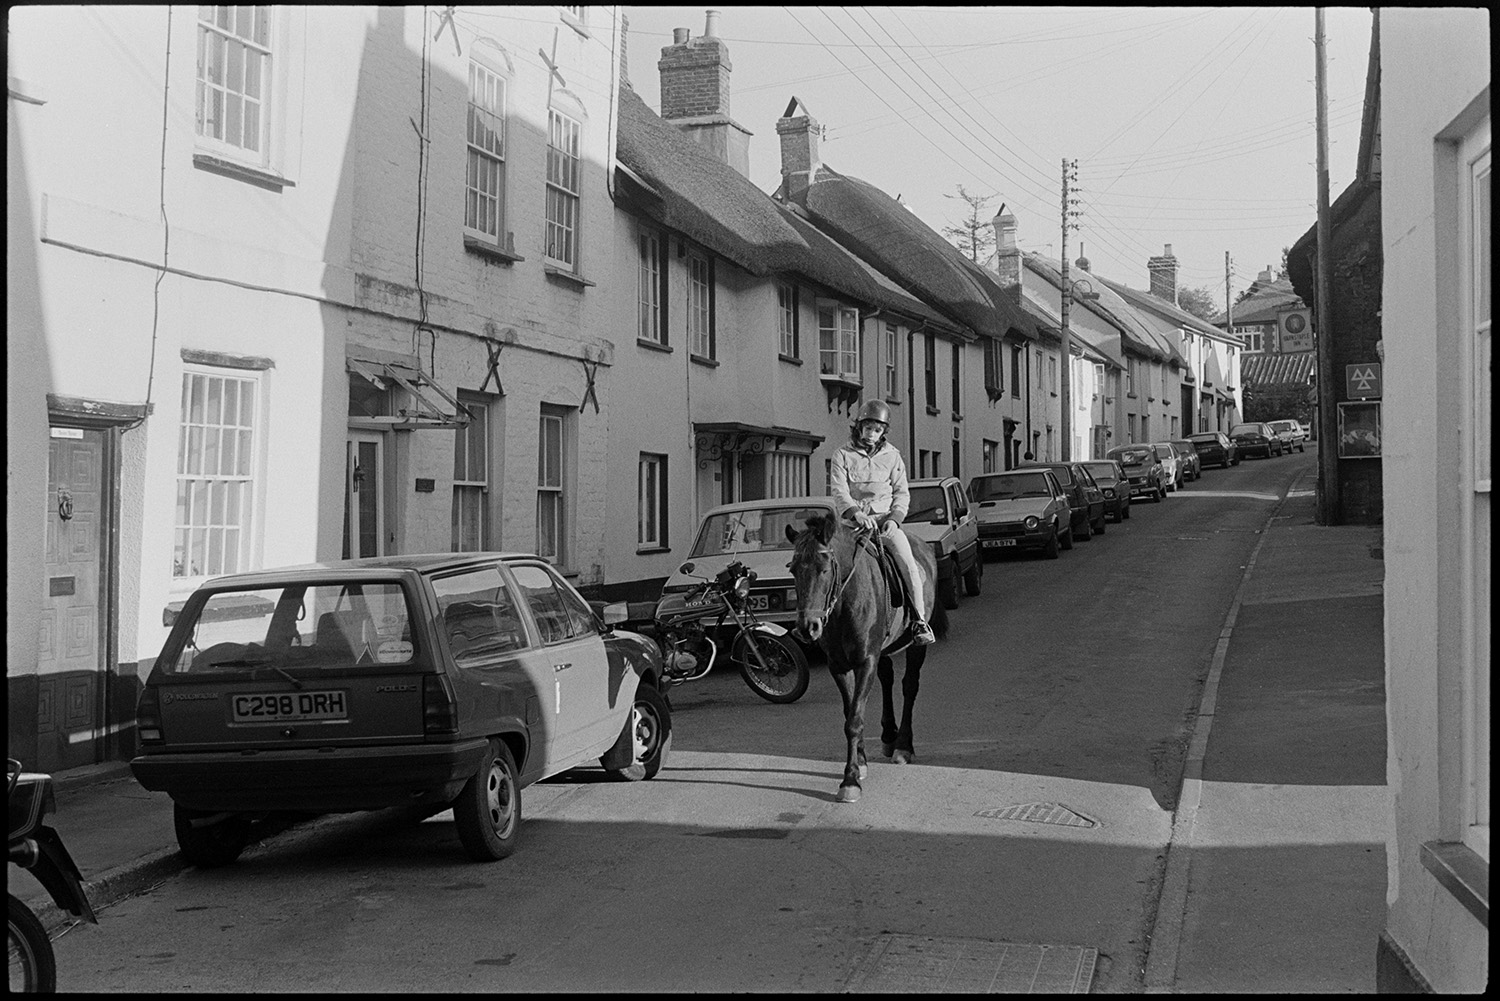 Early morning, postman's round. Dustbin refuse bags in street. Cars passing and pony.
[A young person a pony down East Street, Chulmleigh past the Barnstaple Inn, in the early morning. Parked cars and a motorbike are visible along the street, outside thatched cottages.]